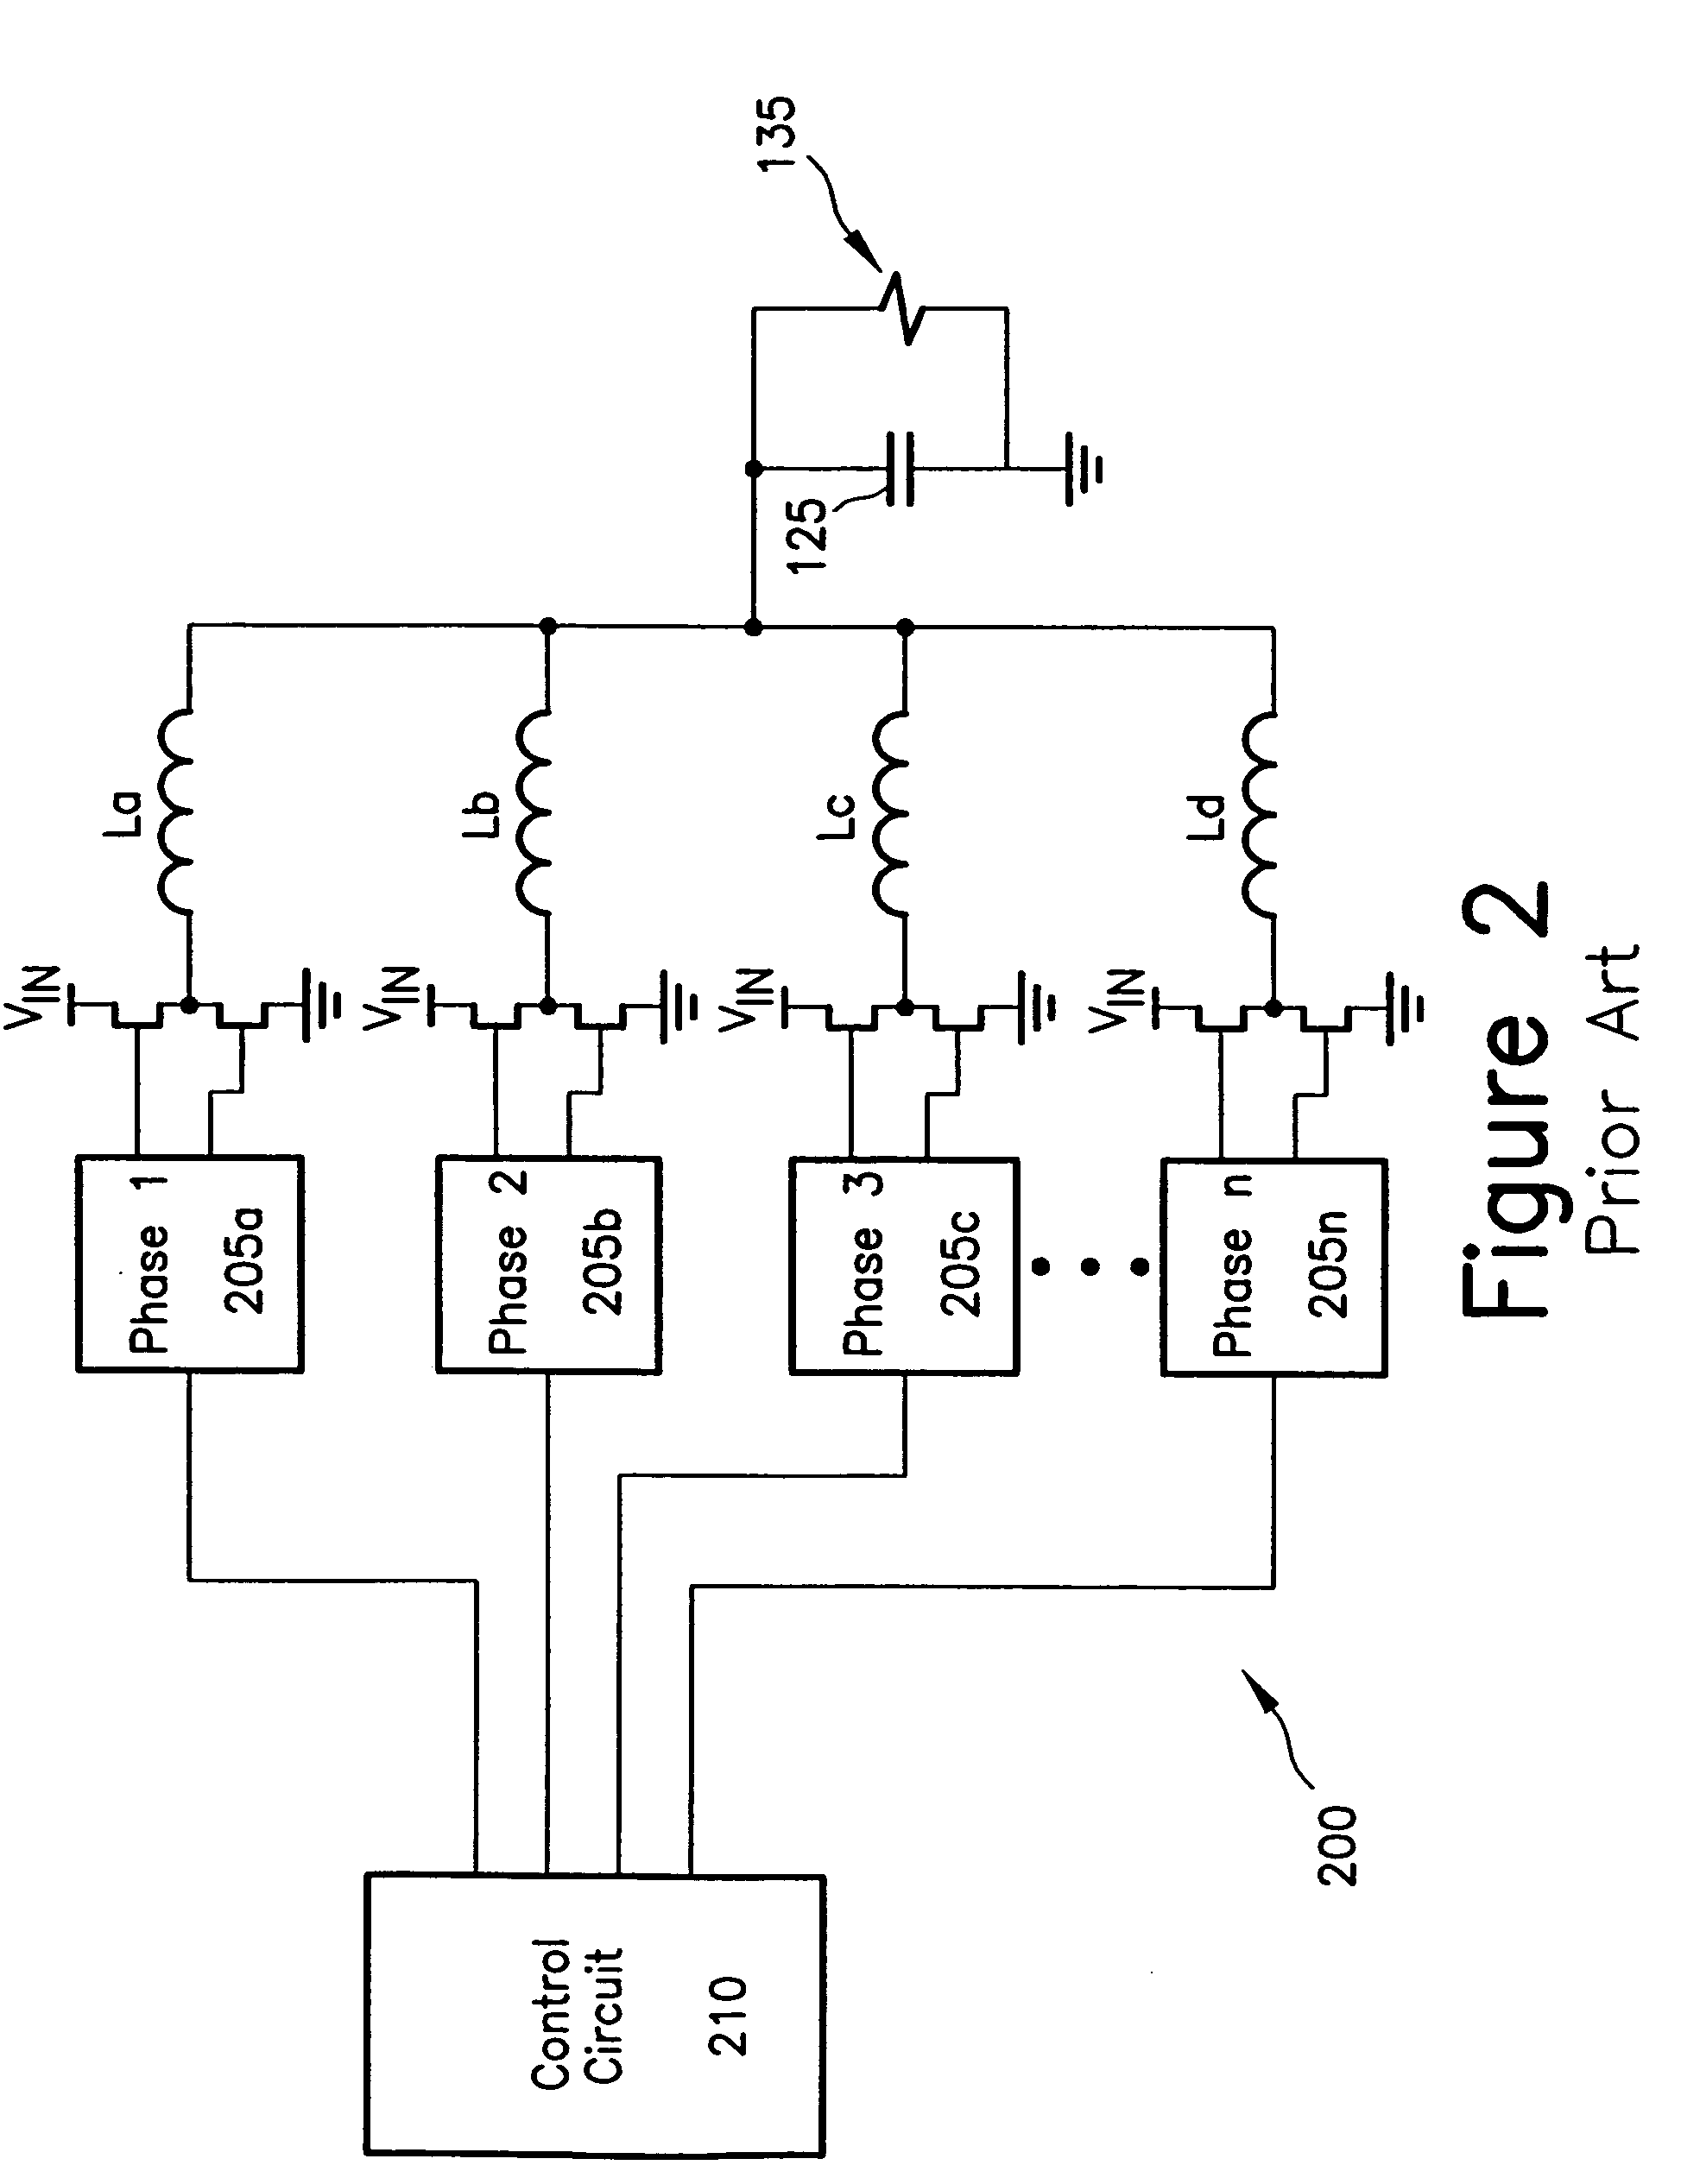 DC-DC regulator with switching frequency responsive to load